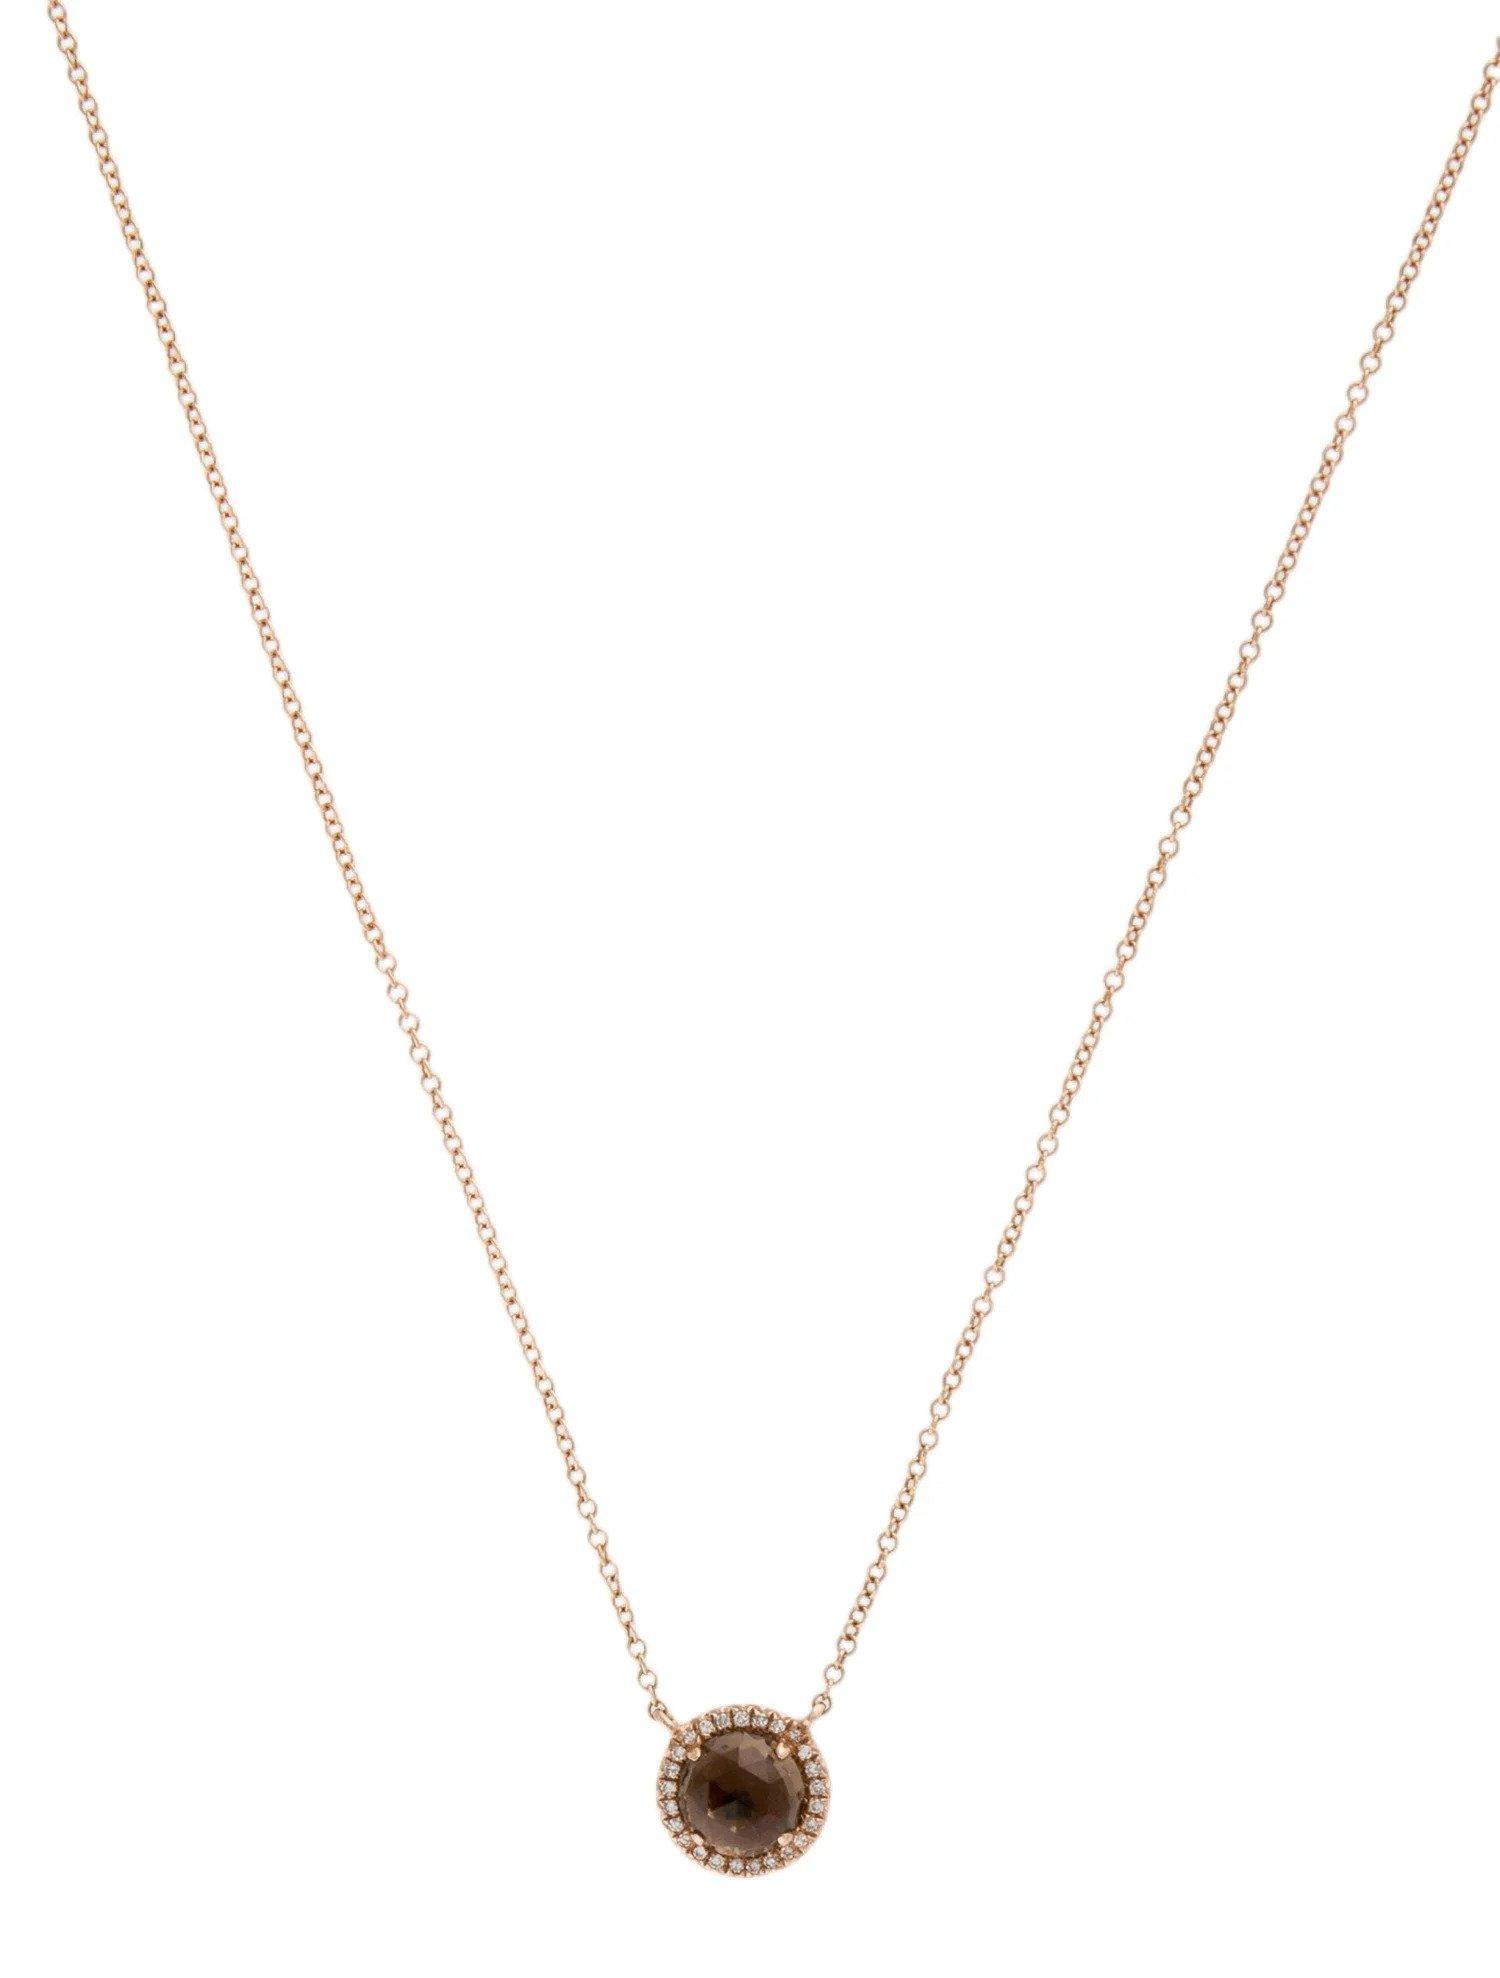 1.15 Carat Round Smoky Quartz & Diamond Rose Gold Pendant Necklace  In New Condition For Sale In Great Neck, NY